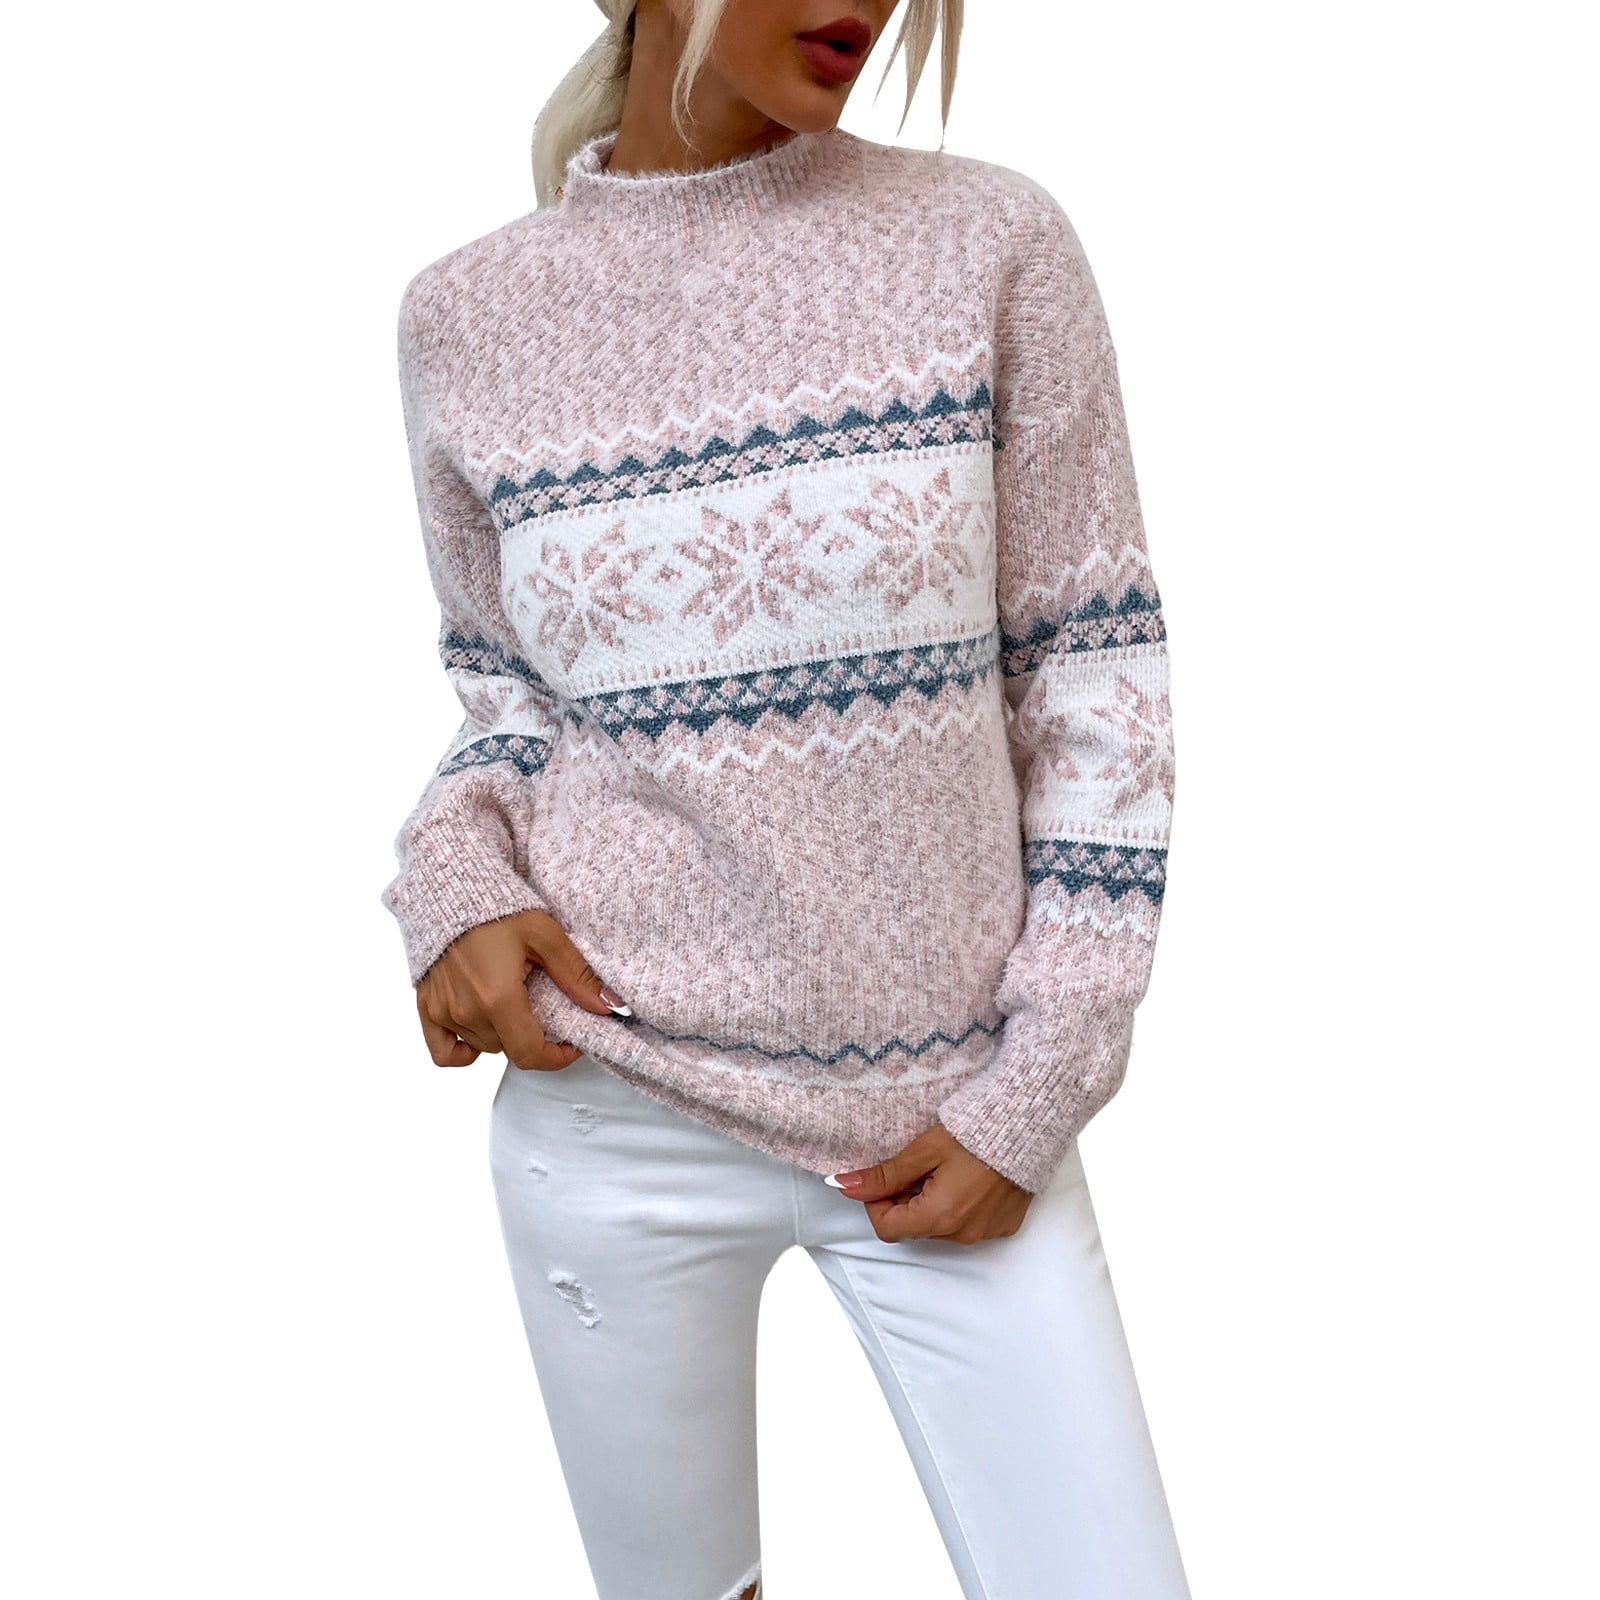  Warehouse Open Box Deals Clearance Christmas Sweater Women  Medium Long Autumn/Winter Turtleneck Long Sleeved Knit Sweater Stylish  Loose Classic Coat Cashmere Sweater White : Arts, Crafts & Sewing